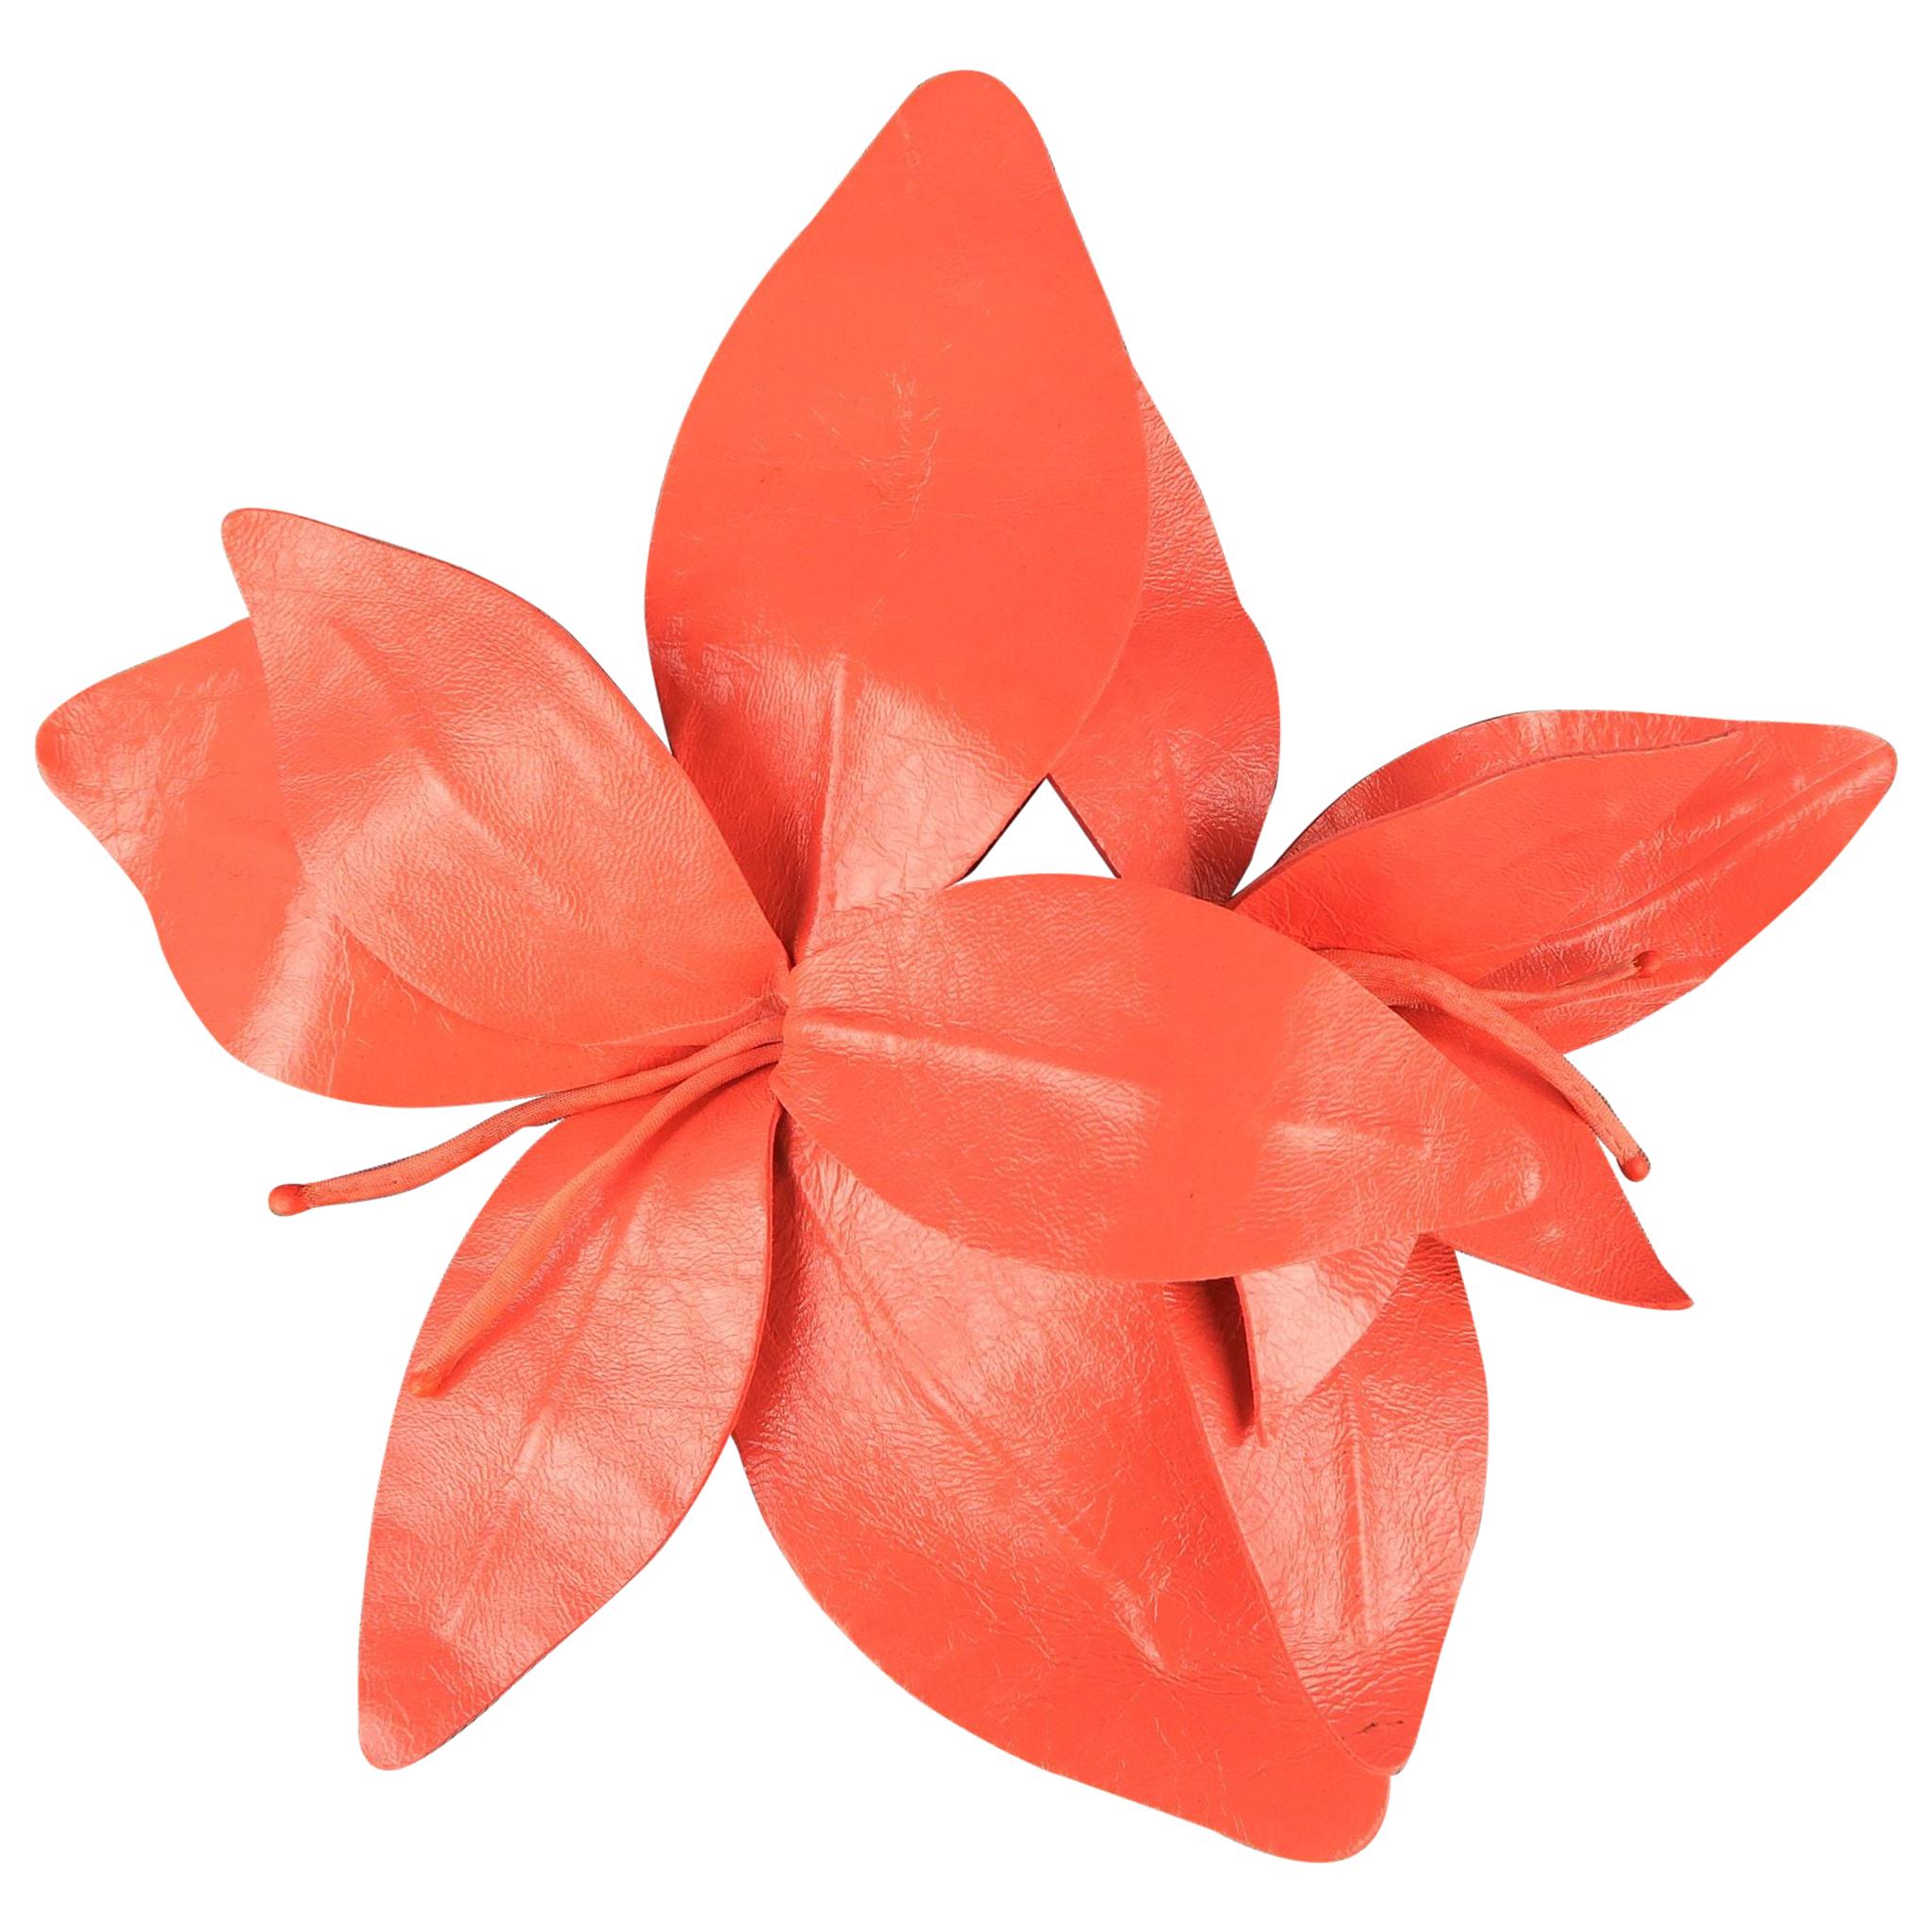 MARC JACOBS Spring 2011 Coral Pink Leather Lilies Pin